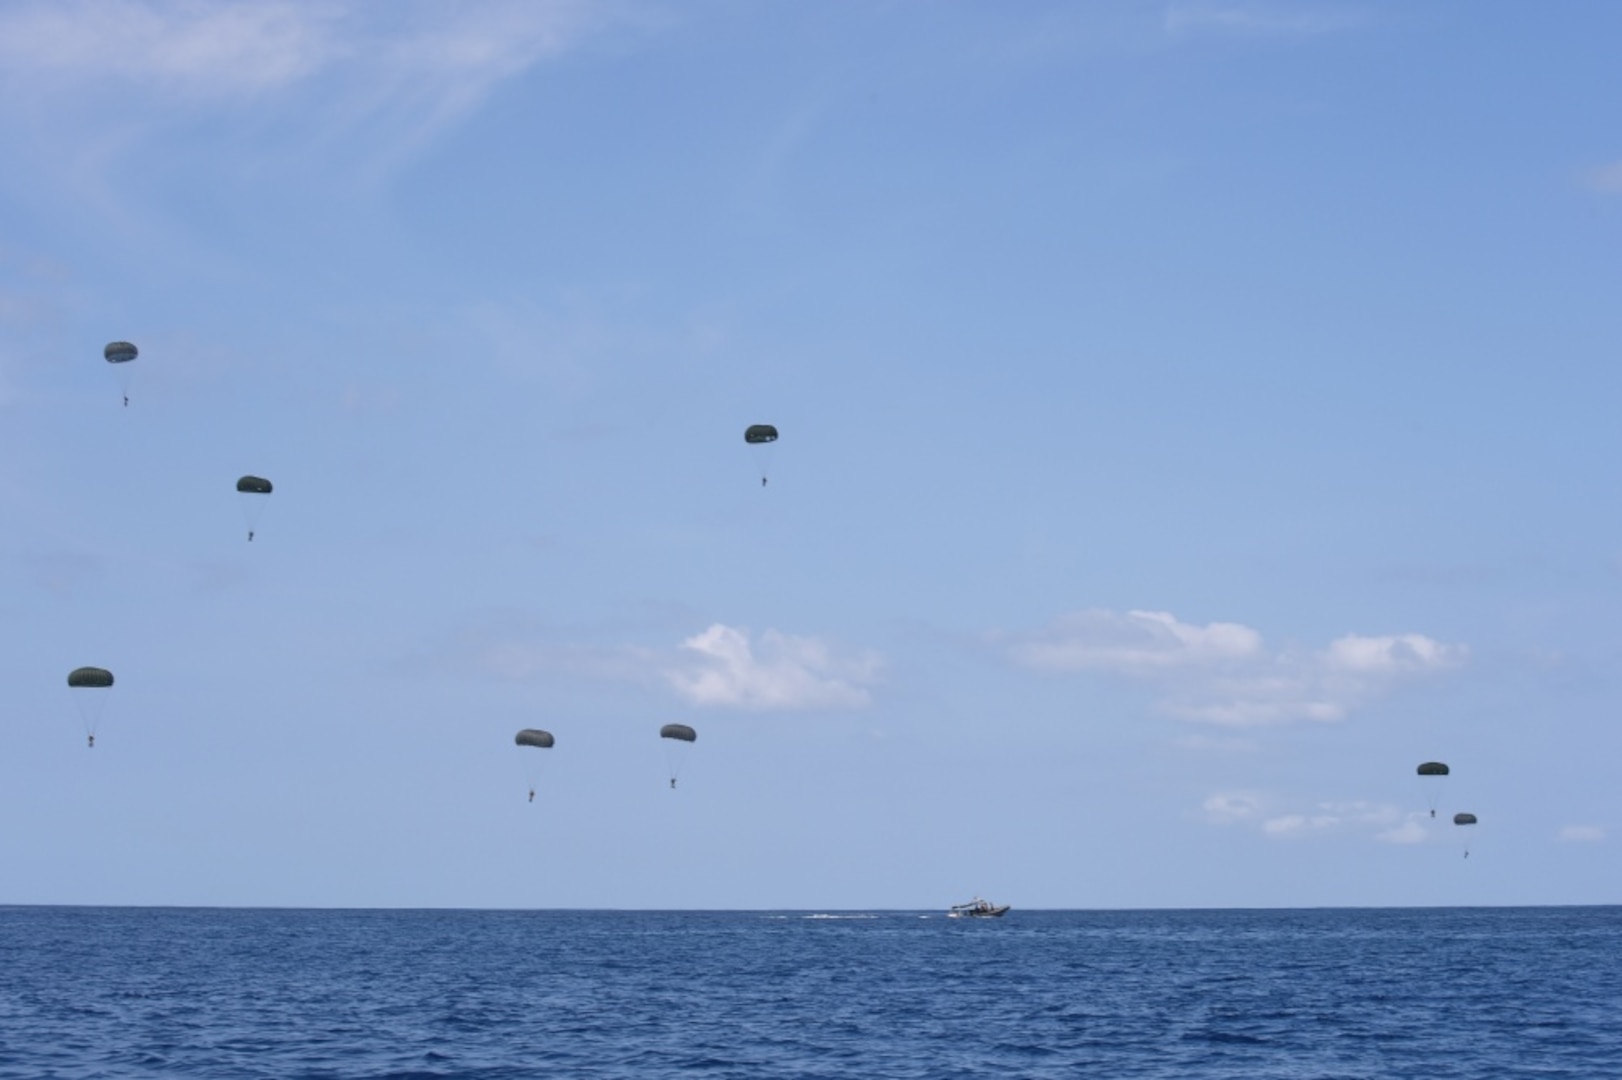 (July 20, 2016) - Paratroopers assigned to the 1st Battalion, 1st Special Forces Group (Airborne) conduct a water jump off the eastern coast of Oahu during Rim of the Pacific 2016. Twenty-six nations, more than 40 ships and submarines, more than 200 aircraft, and 25,000 personnel are participating in RIMPAC from June 30 to Aug. 4, in and around the Hawaiian Islands and Southern California. The world's largest international maritime exercise, RIMPAC provides a unique training opportunity that helps participants foster and sustain the cooperative relationships that are critical to ensuring the safety of sea lanes and security on the world's oceans. RIMPAC 2016 is the 25th exercise in the series that began in 1971. 